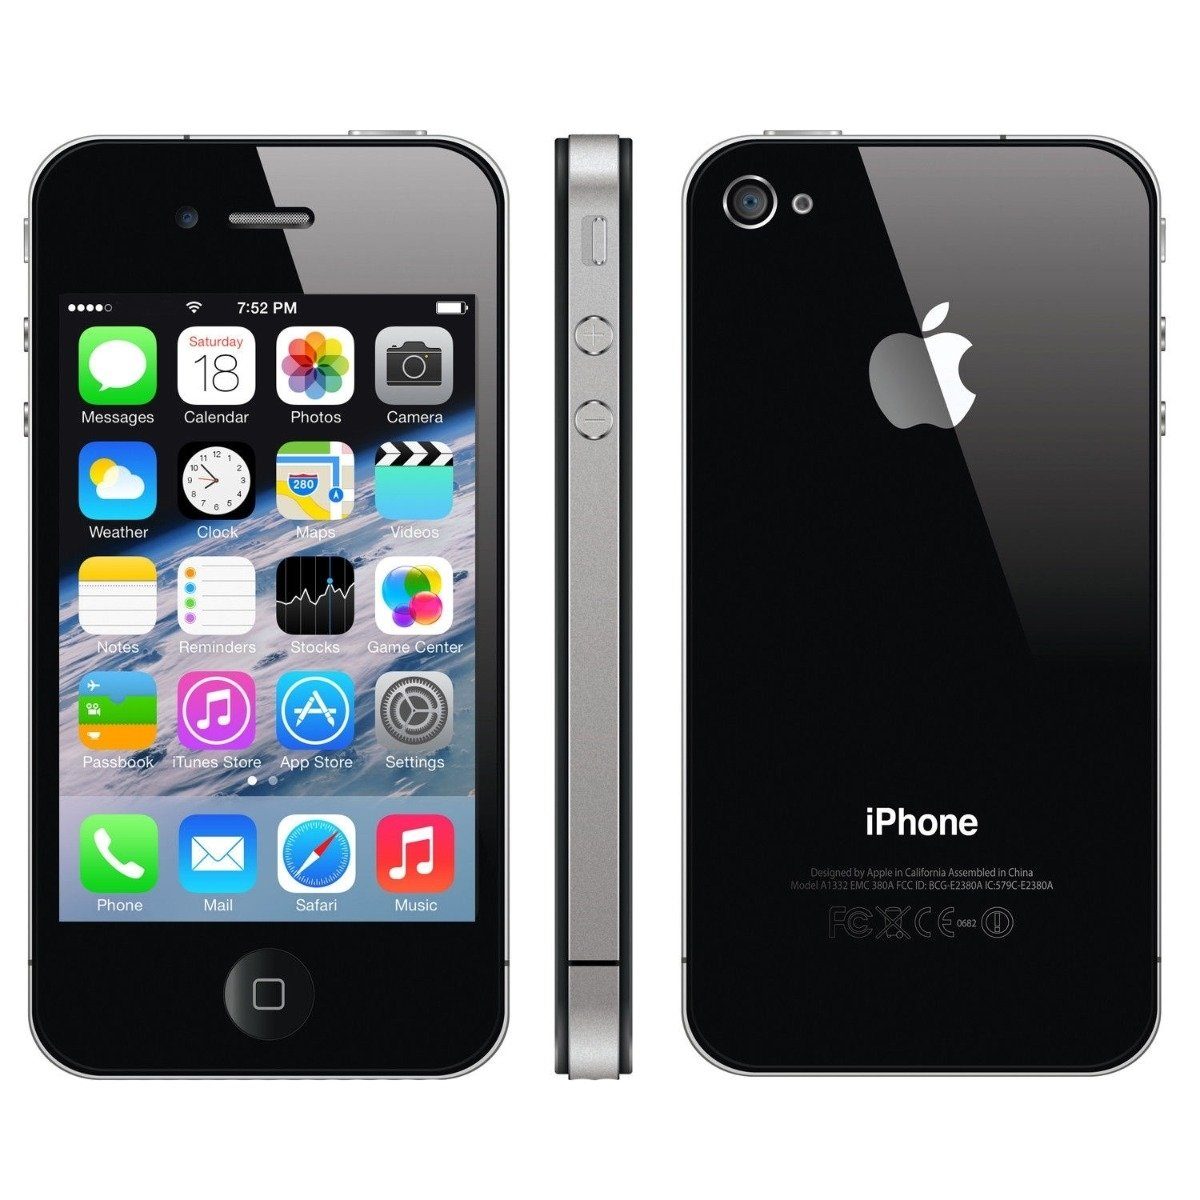 Apple iPhone 4S Factory Unlocked - Assorted Colors and Sizes / Black / 8GB